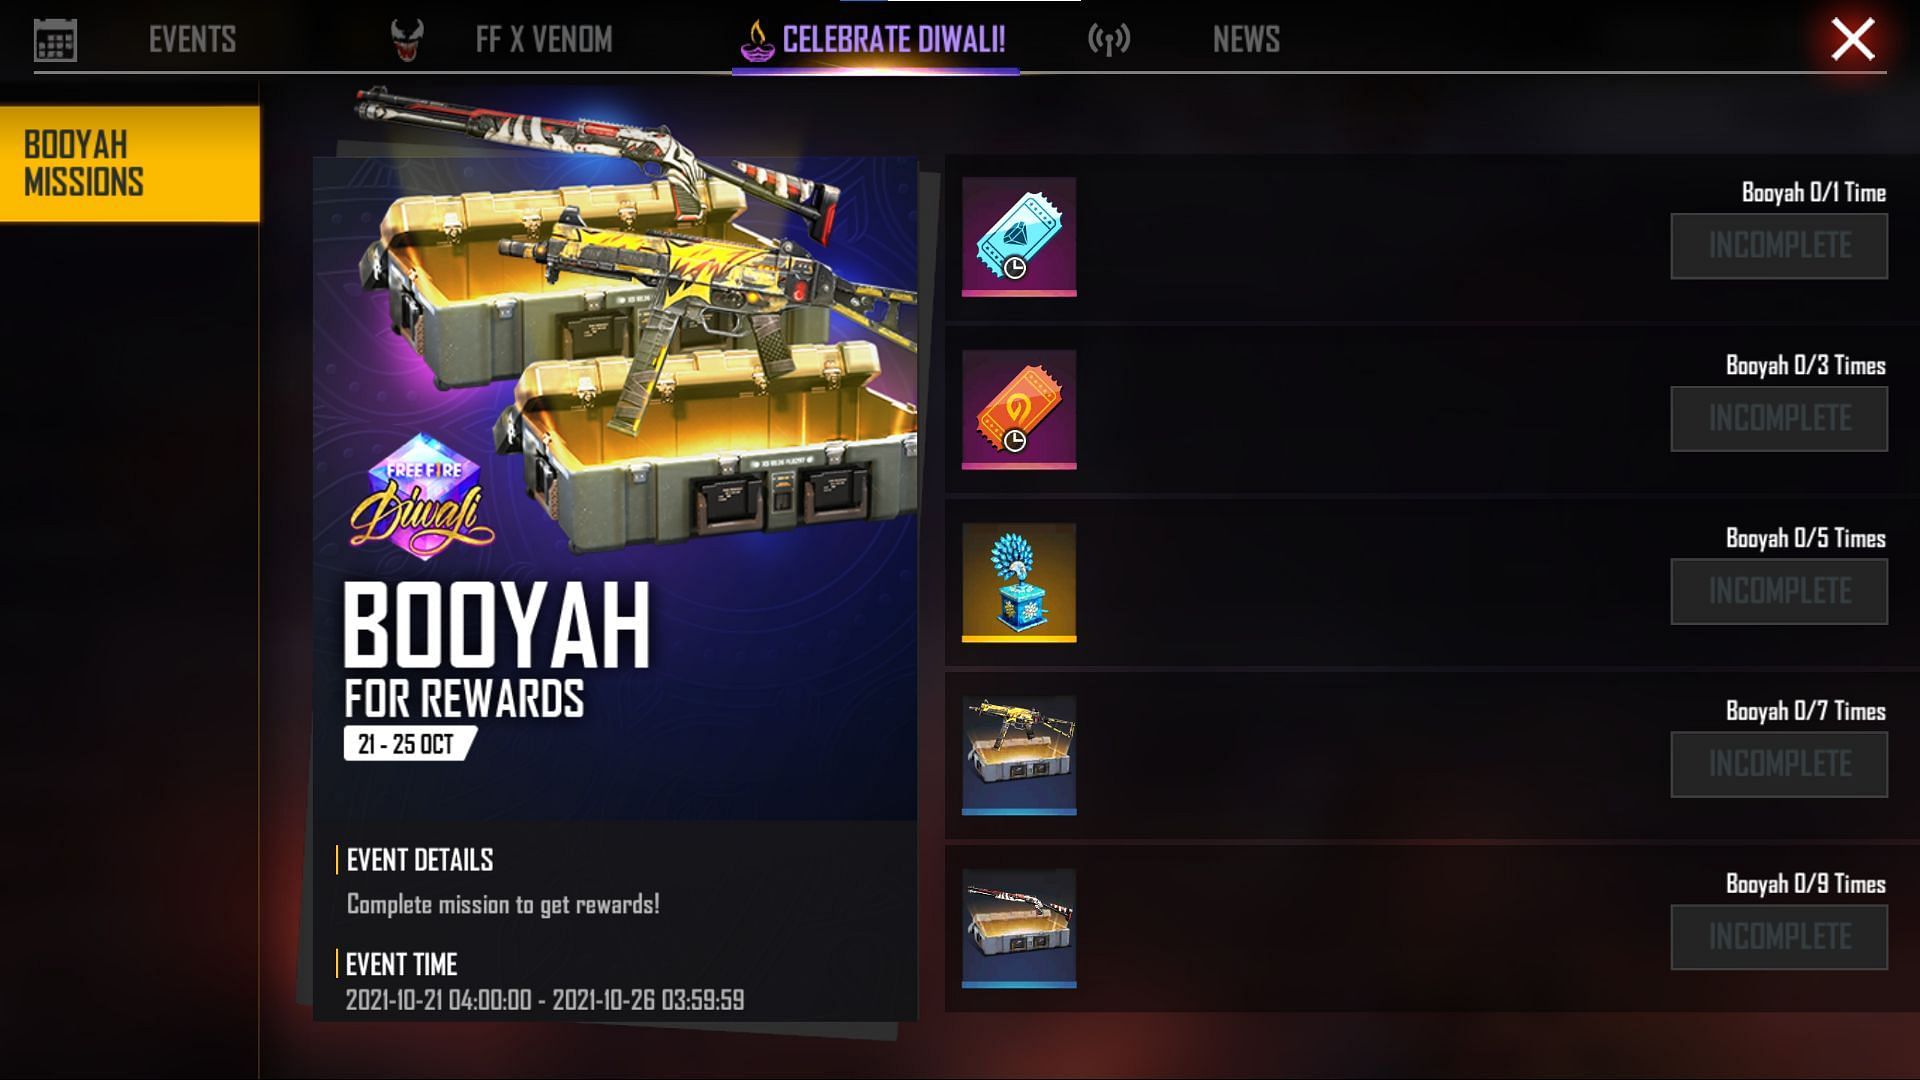 Players can open Booyah Missions under Celebrate Diwali to claim the rewards (Image via Free Fire)